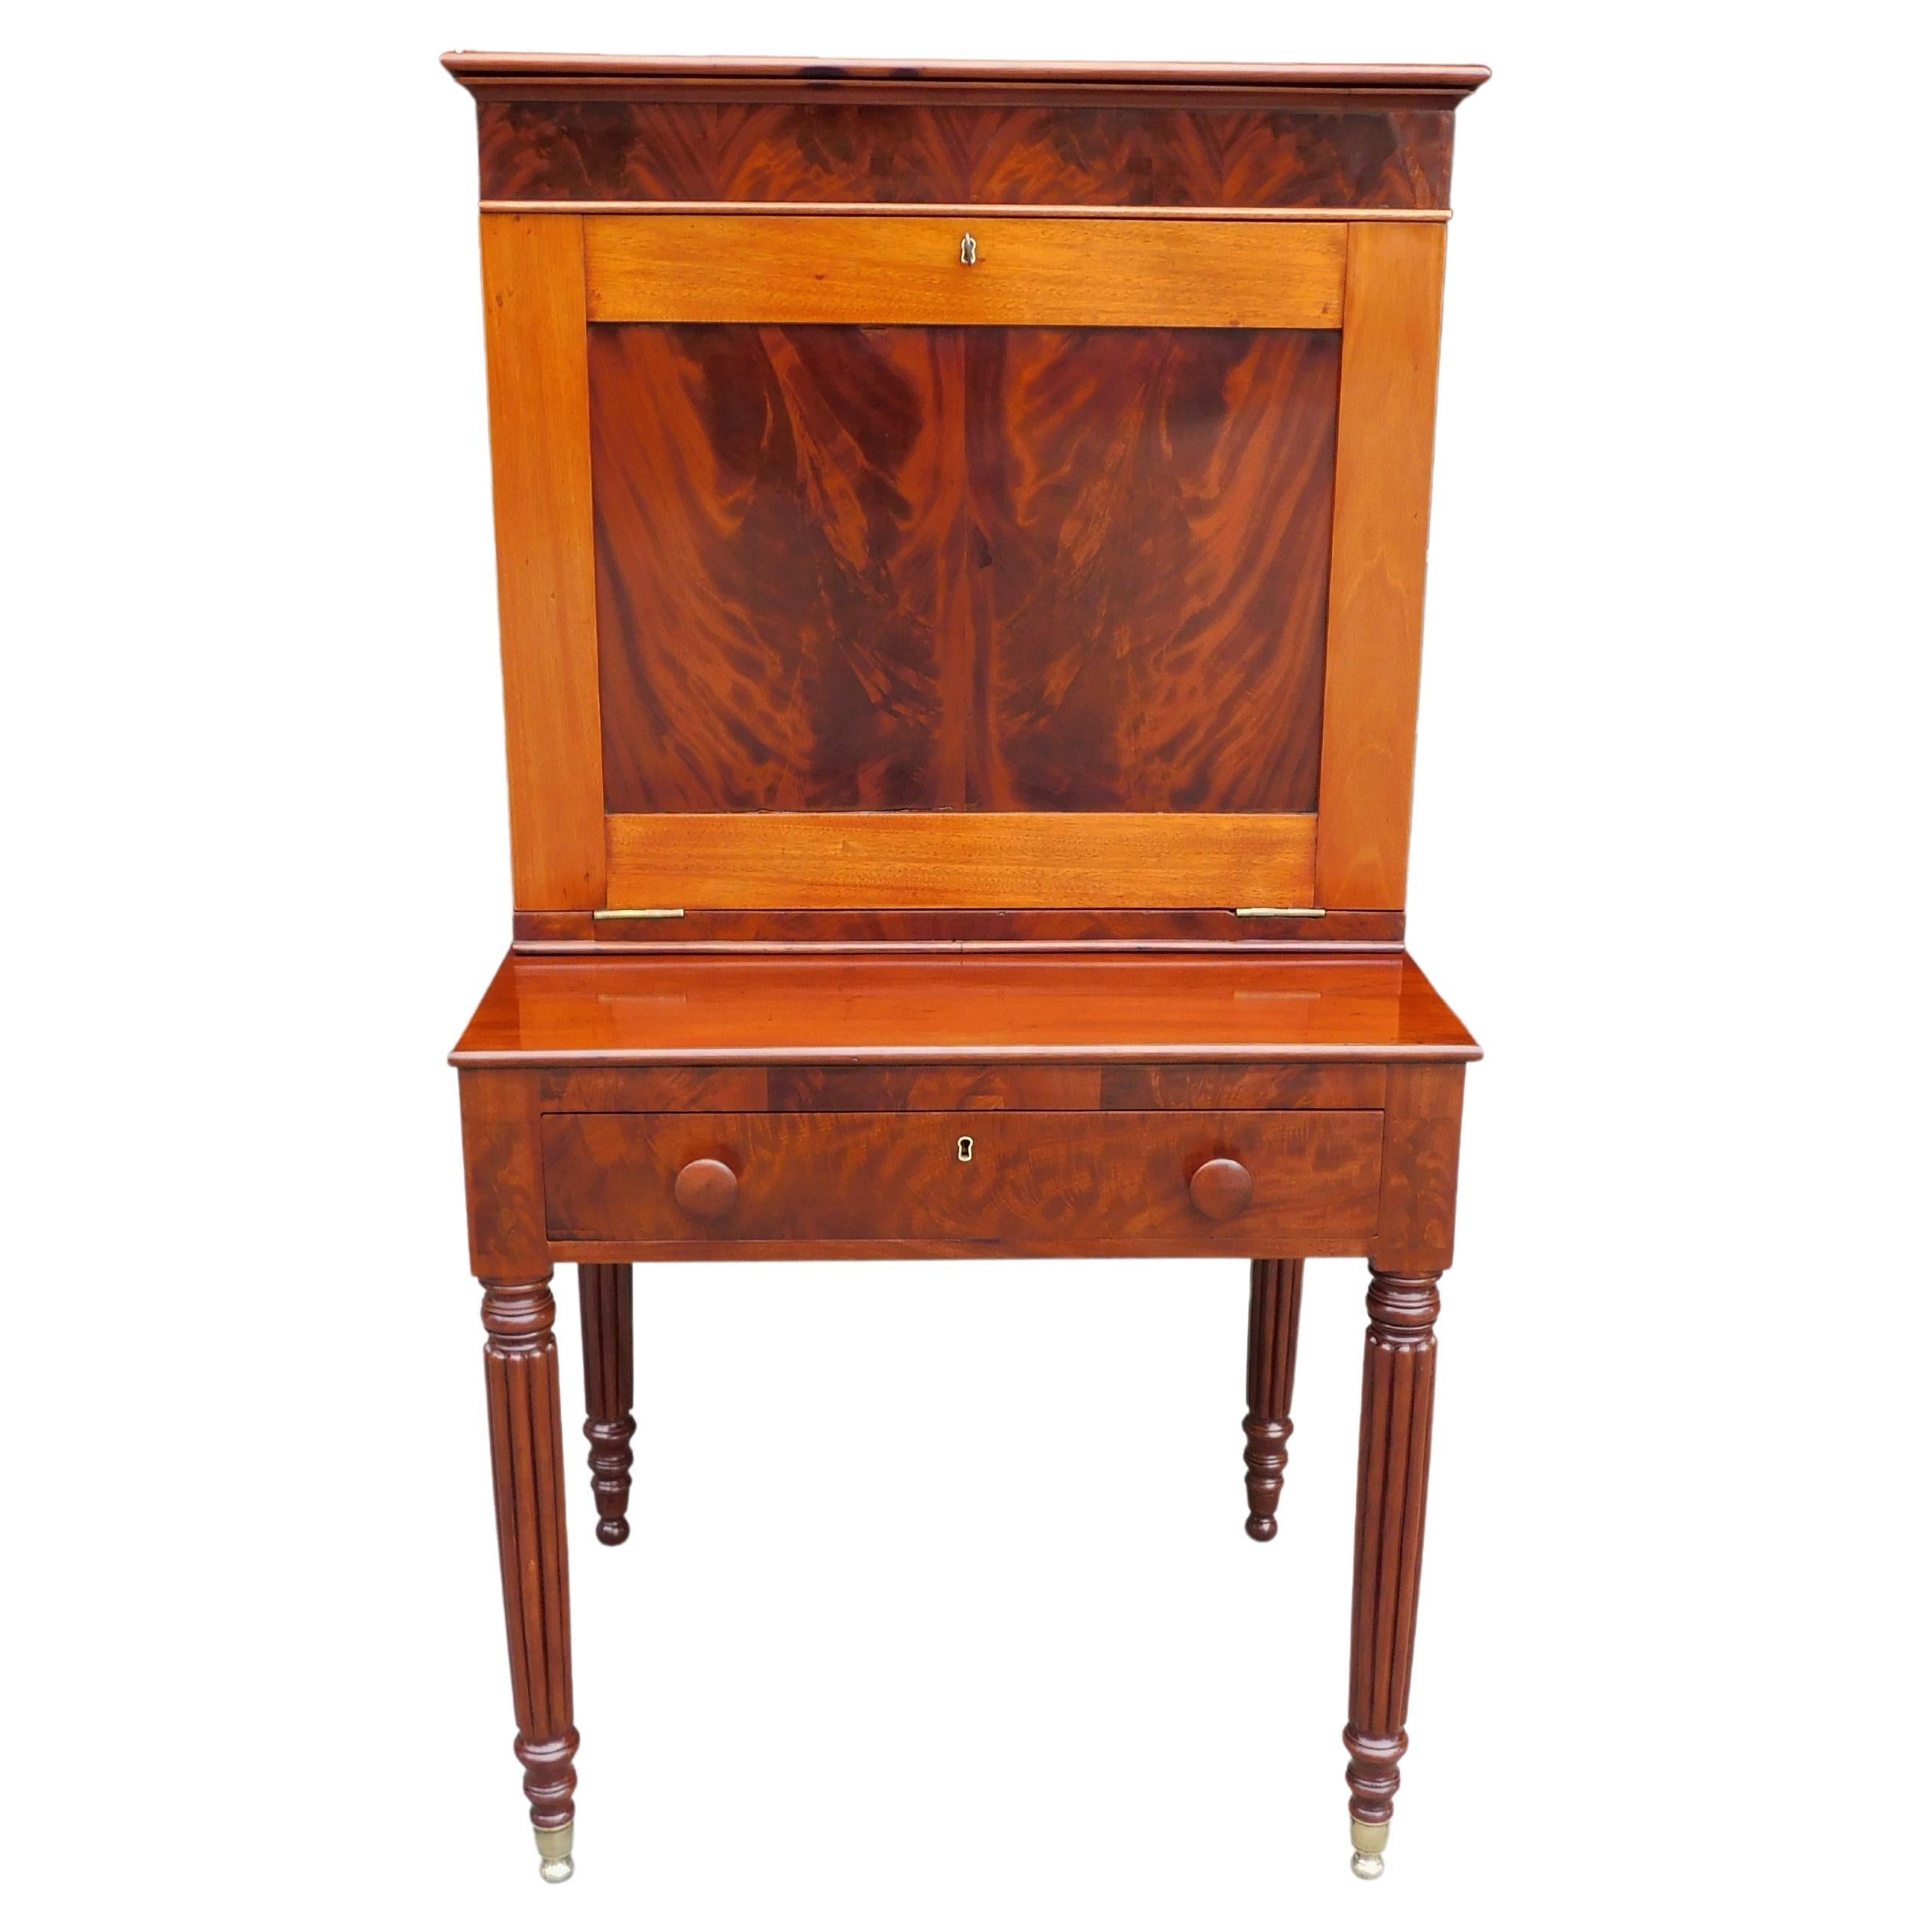 American Southern Mahogany and Leather Plantation Desk with Reeded Legs, C. 1810